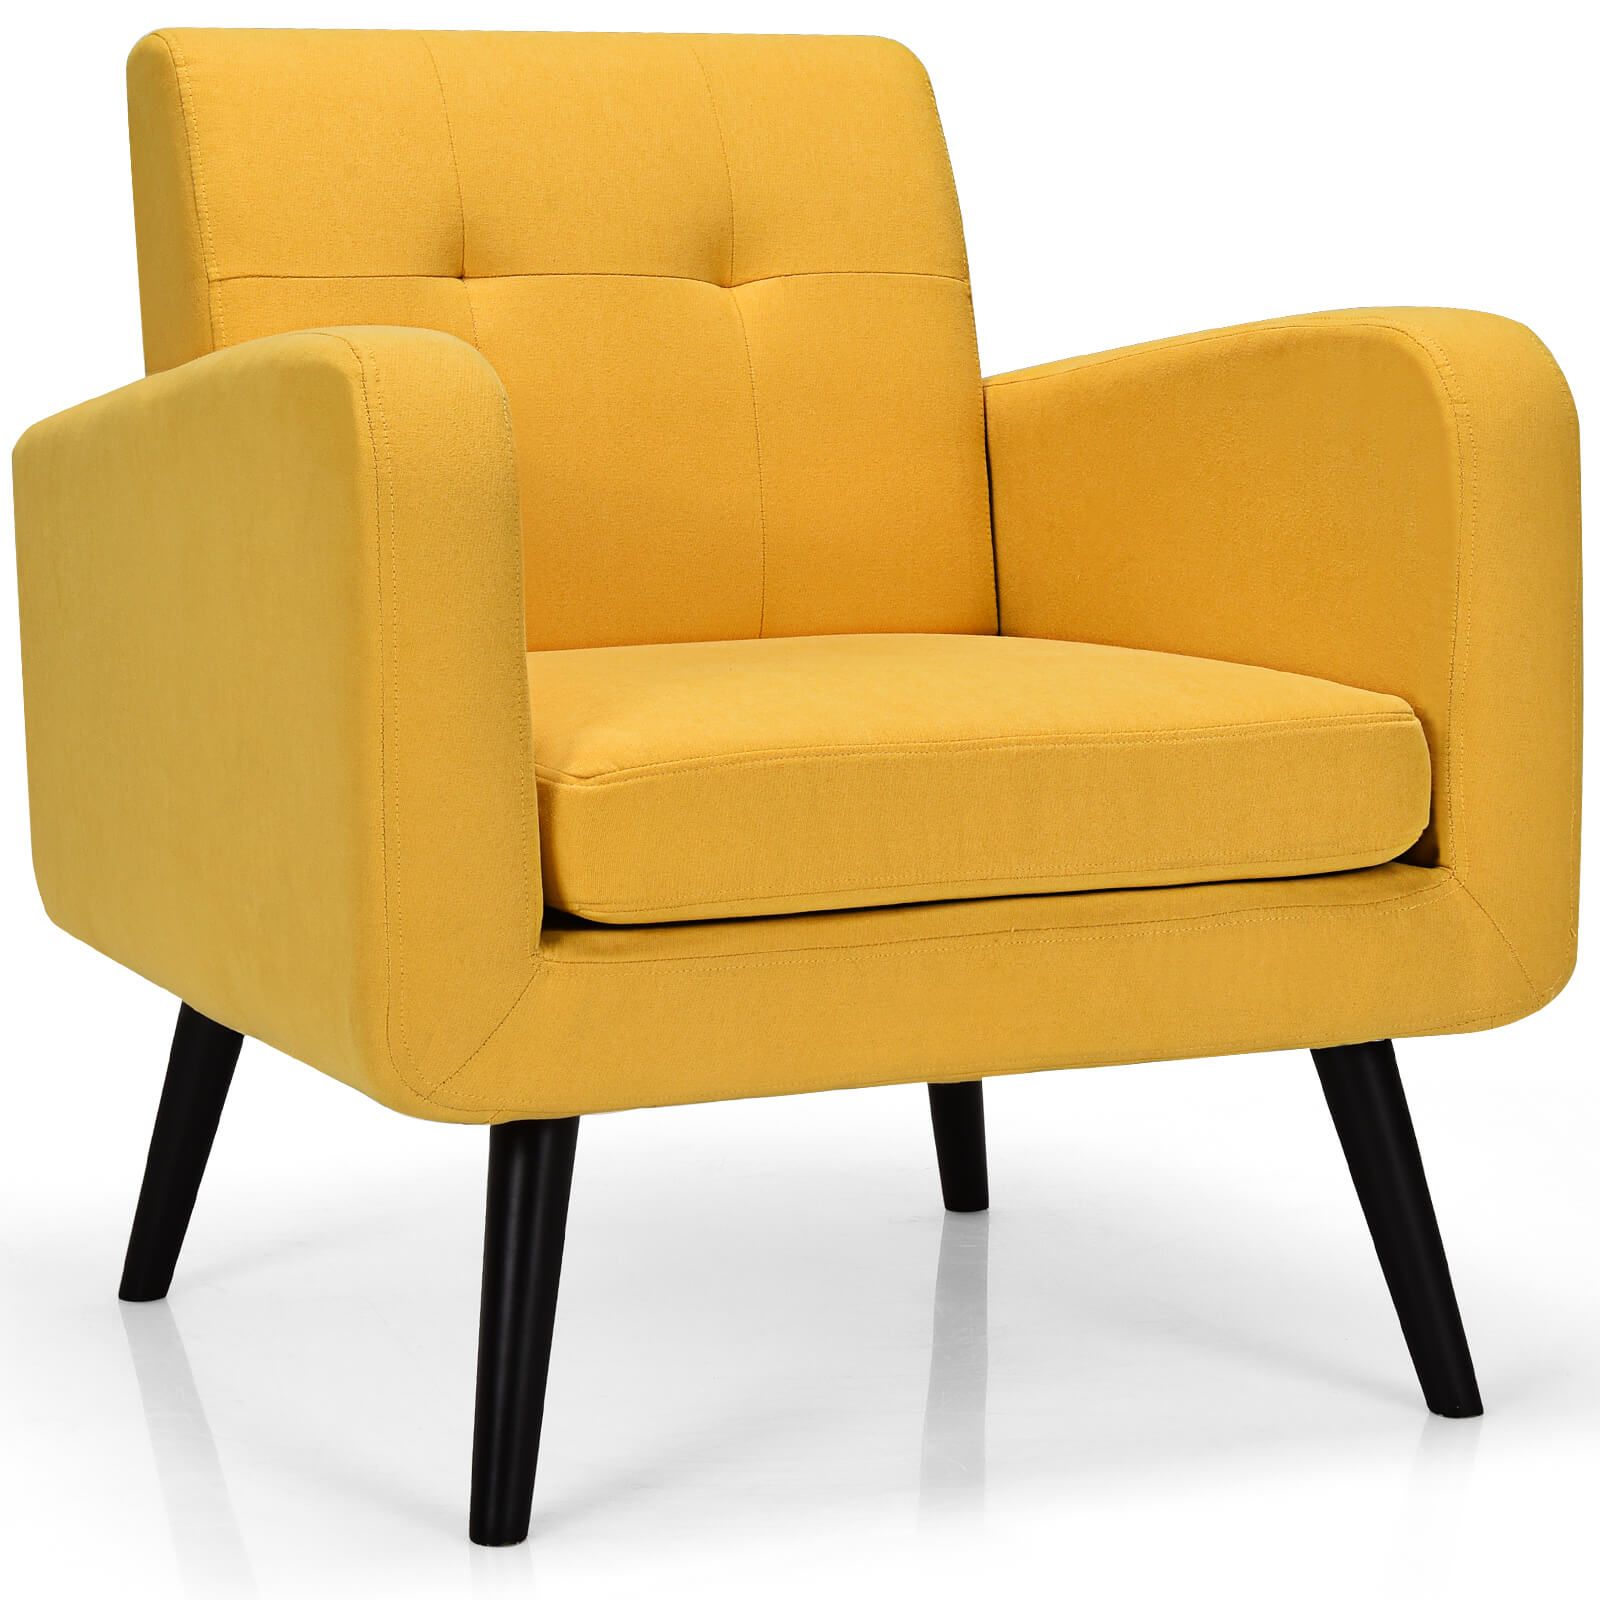 Mid-Century Modern Upholstered Accent Chair with Rubber Wood Legs - Yellow